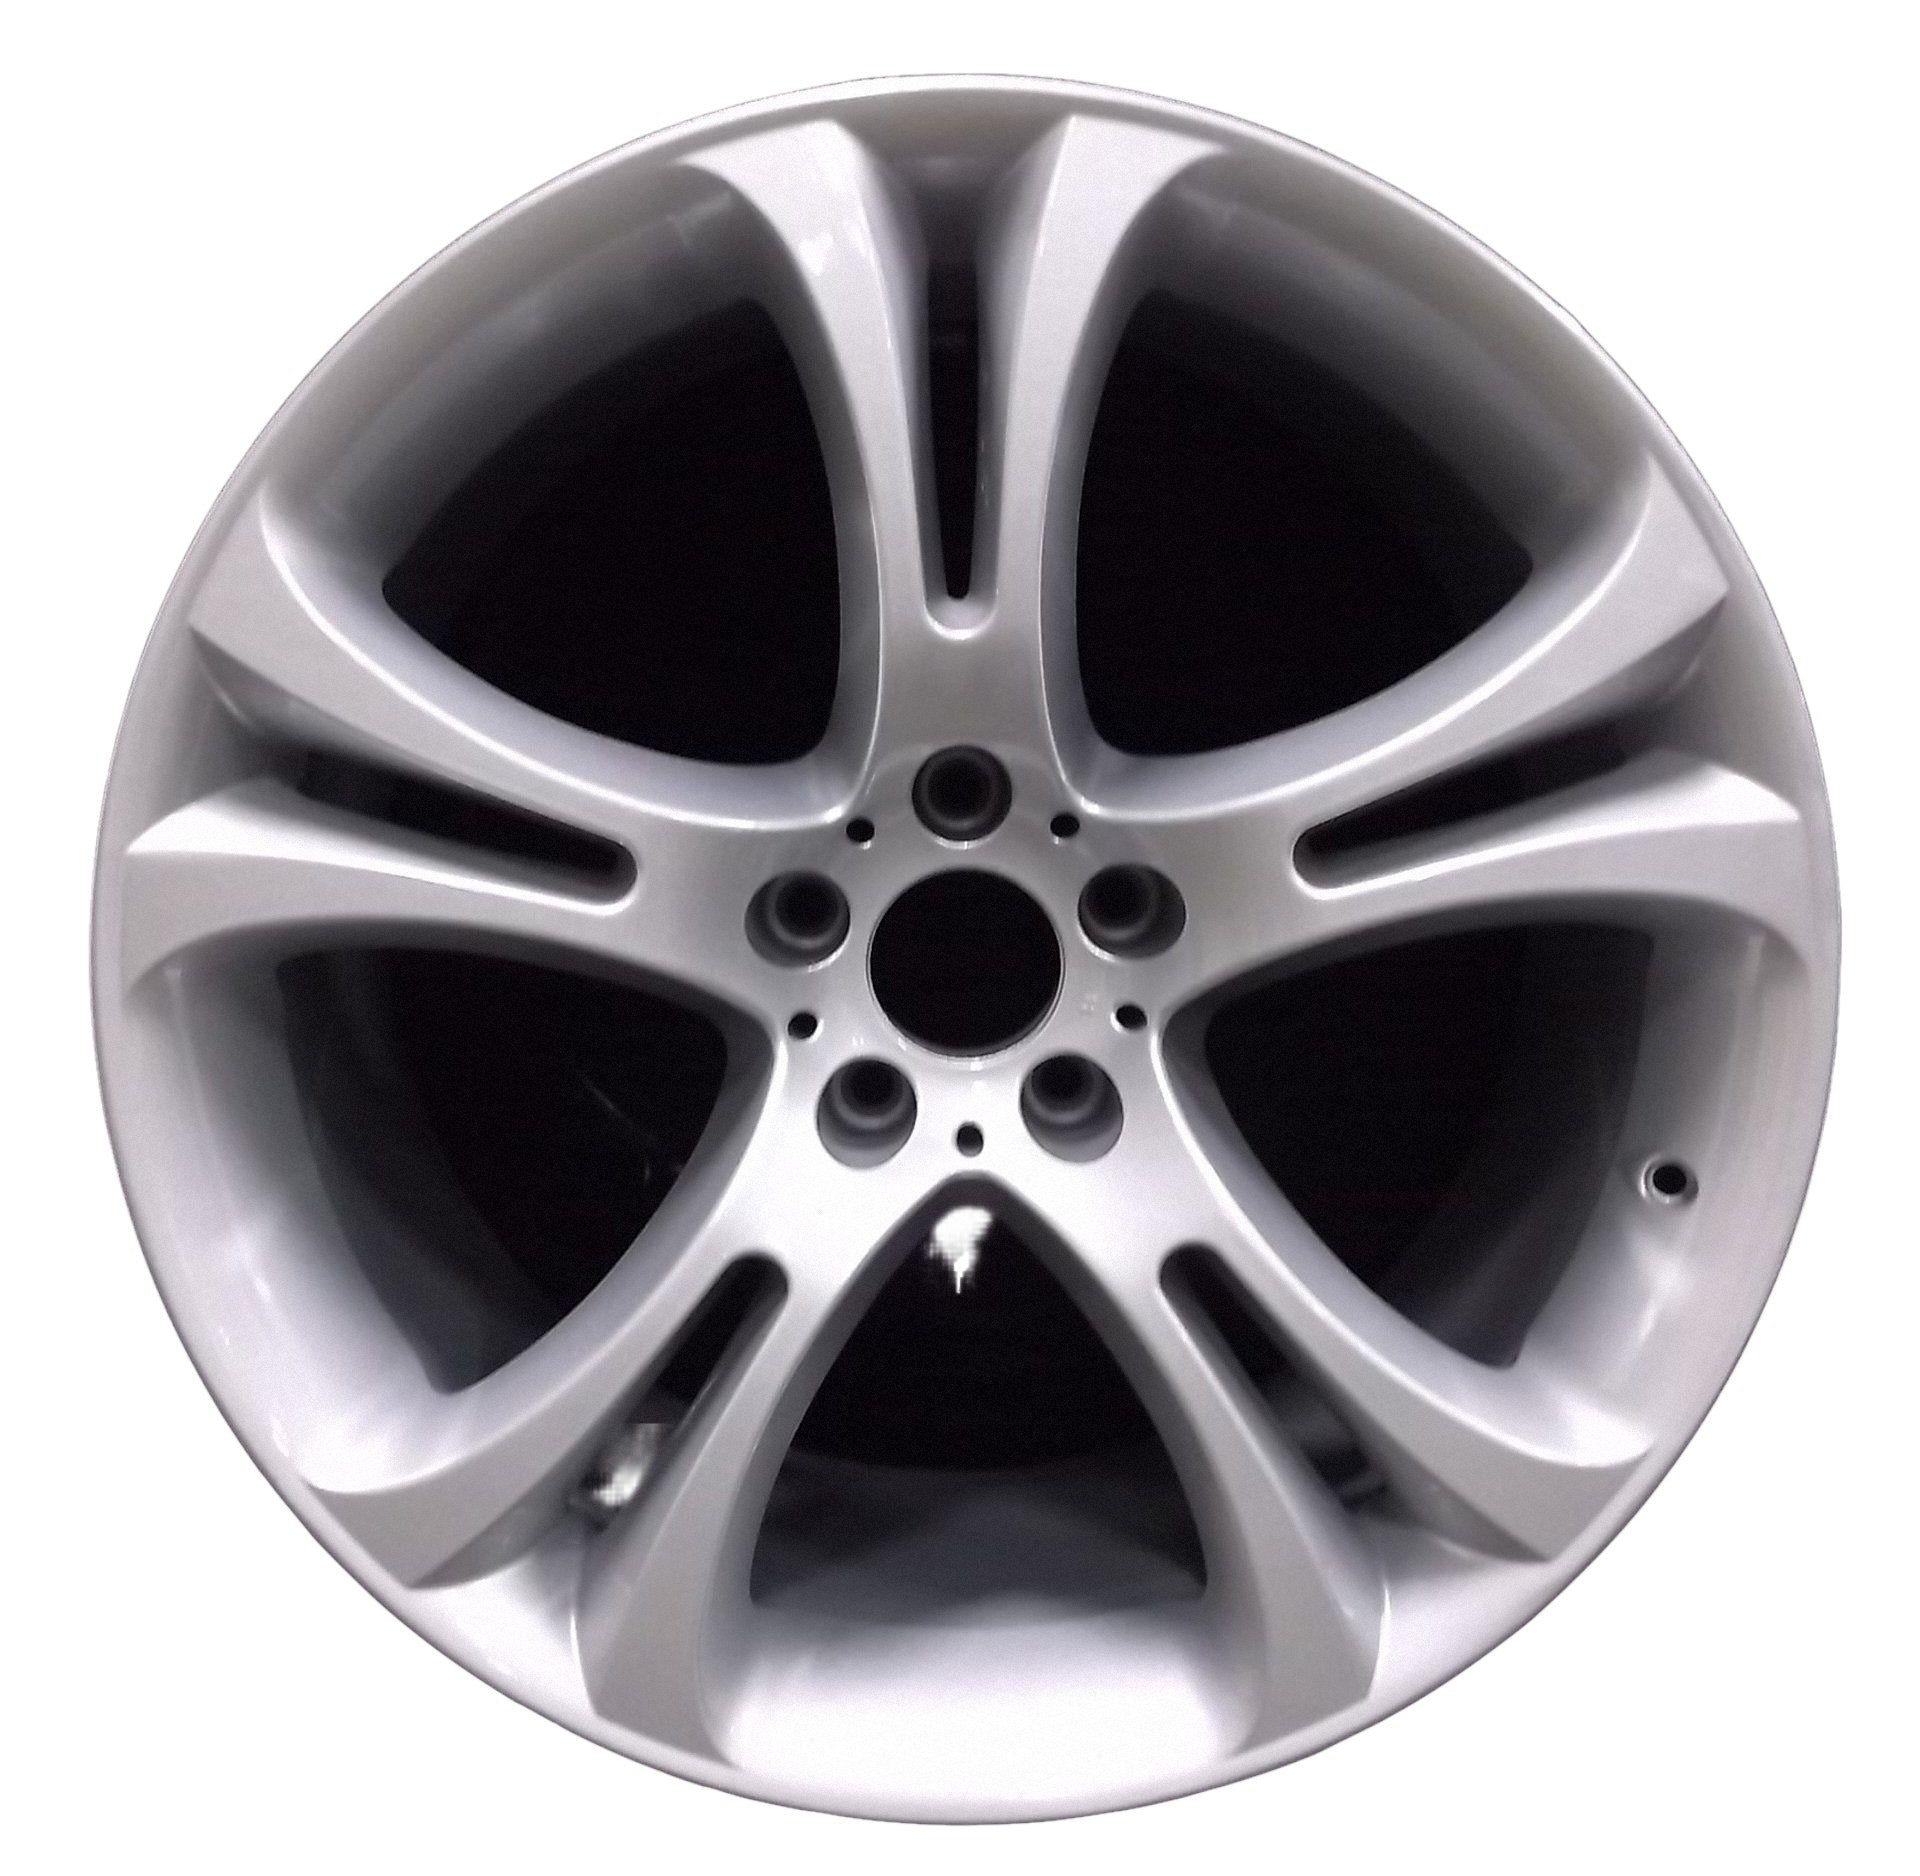 BMW X6M  2010, 2011, 2012, 2013, 2014, 2015 Factory OEM Car Wheel Size 21x11.5 Alloy WAO.71293RE.PS13.FF